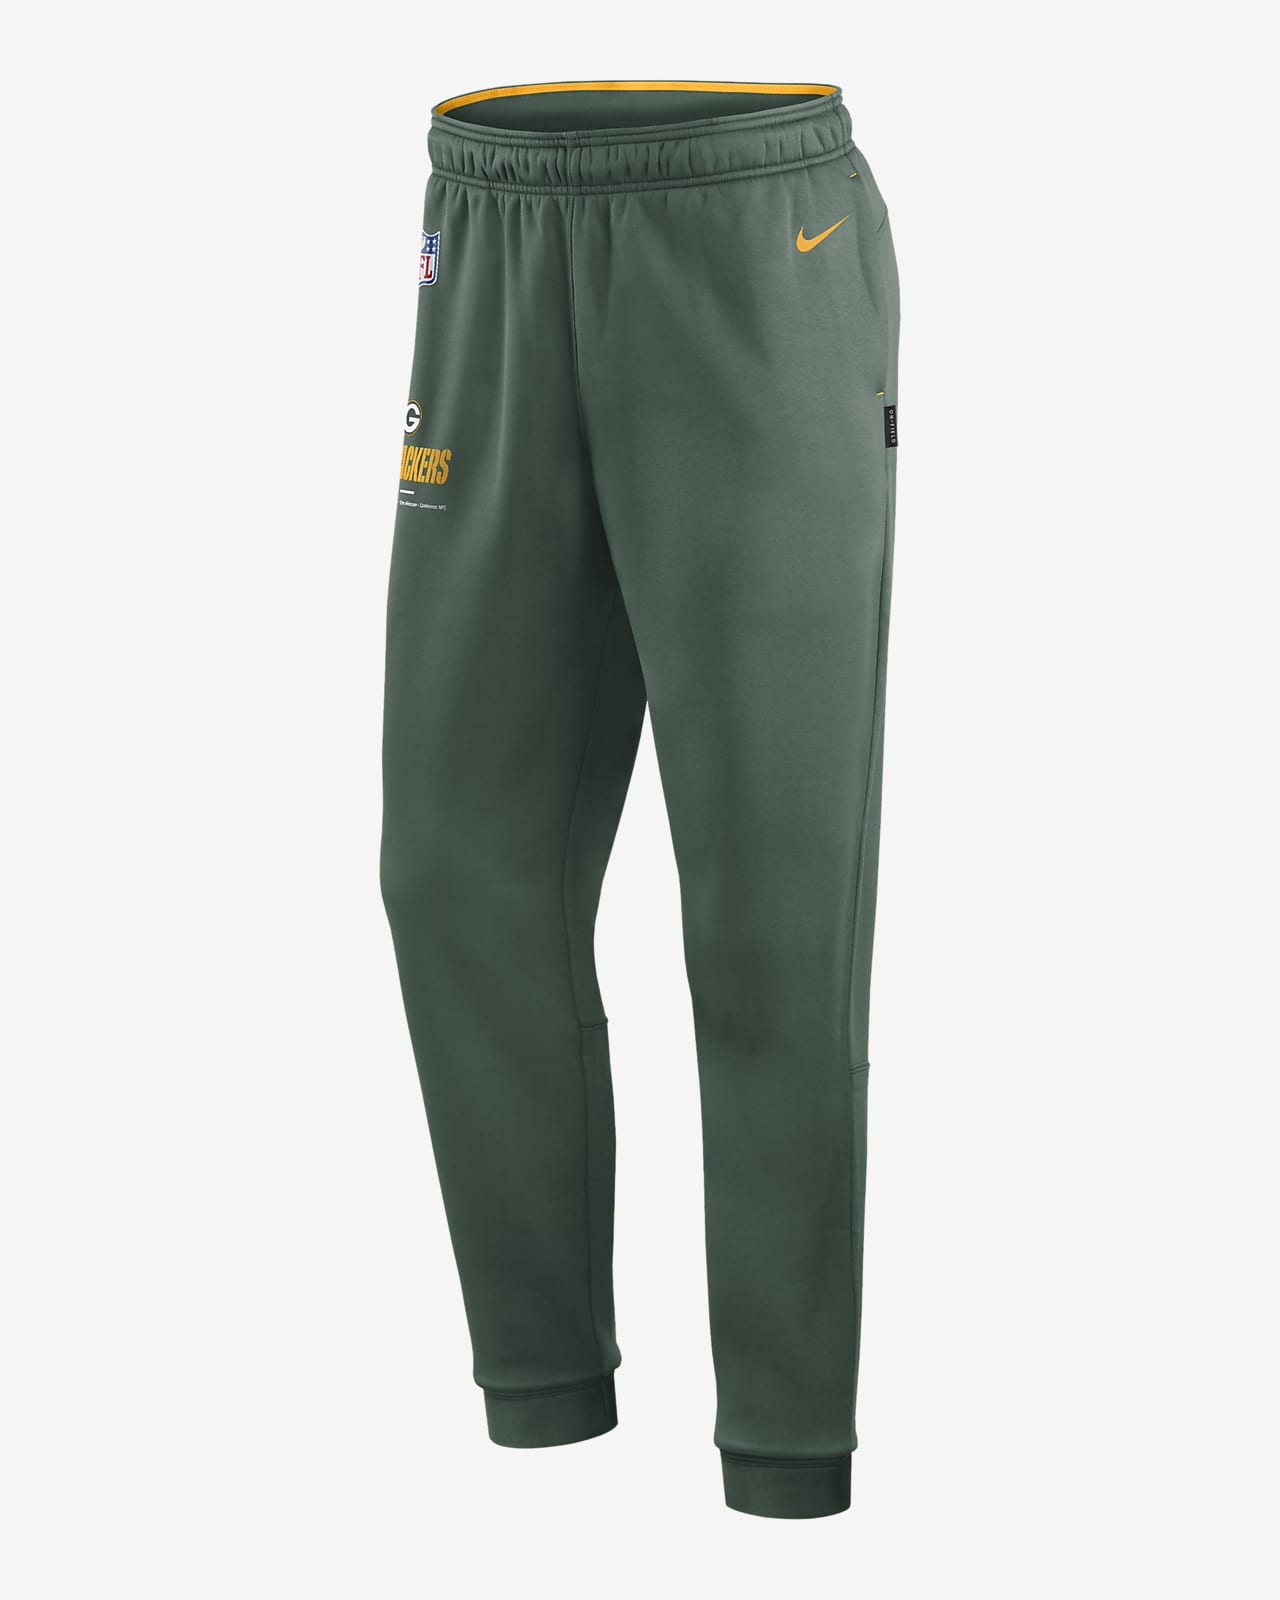 Men's Concepts Sport Charcoal Green Bay Packers Resonance Tapered Lounge  Pants